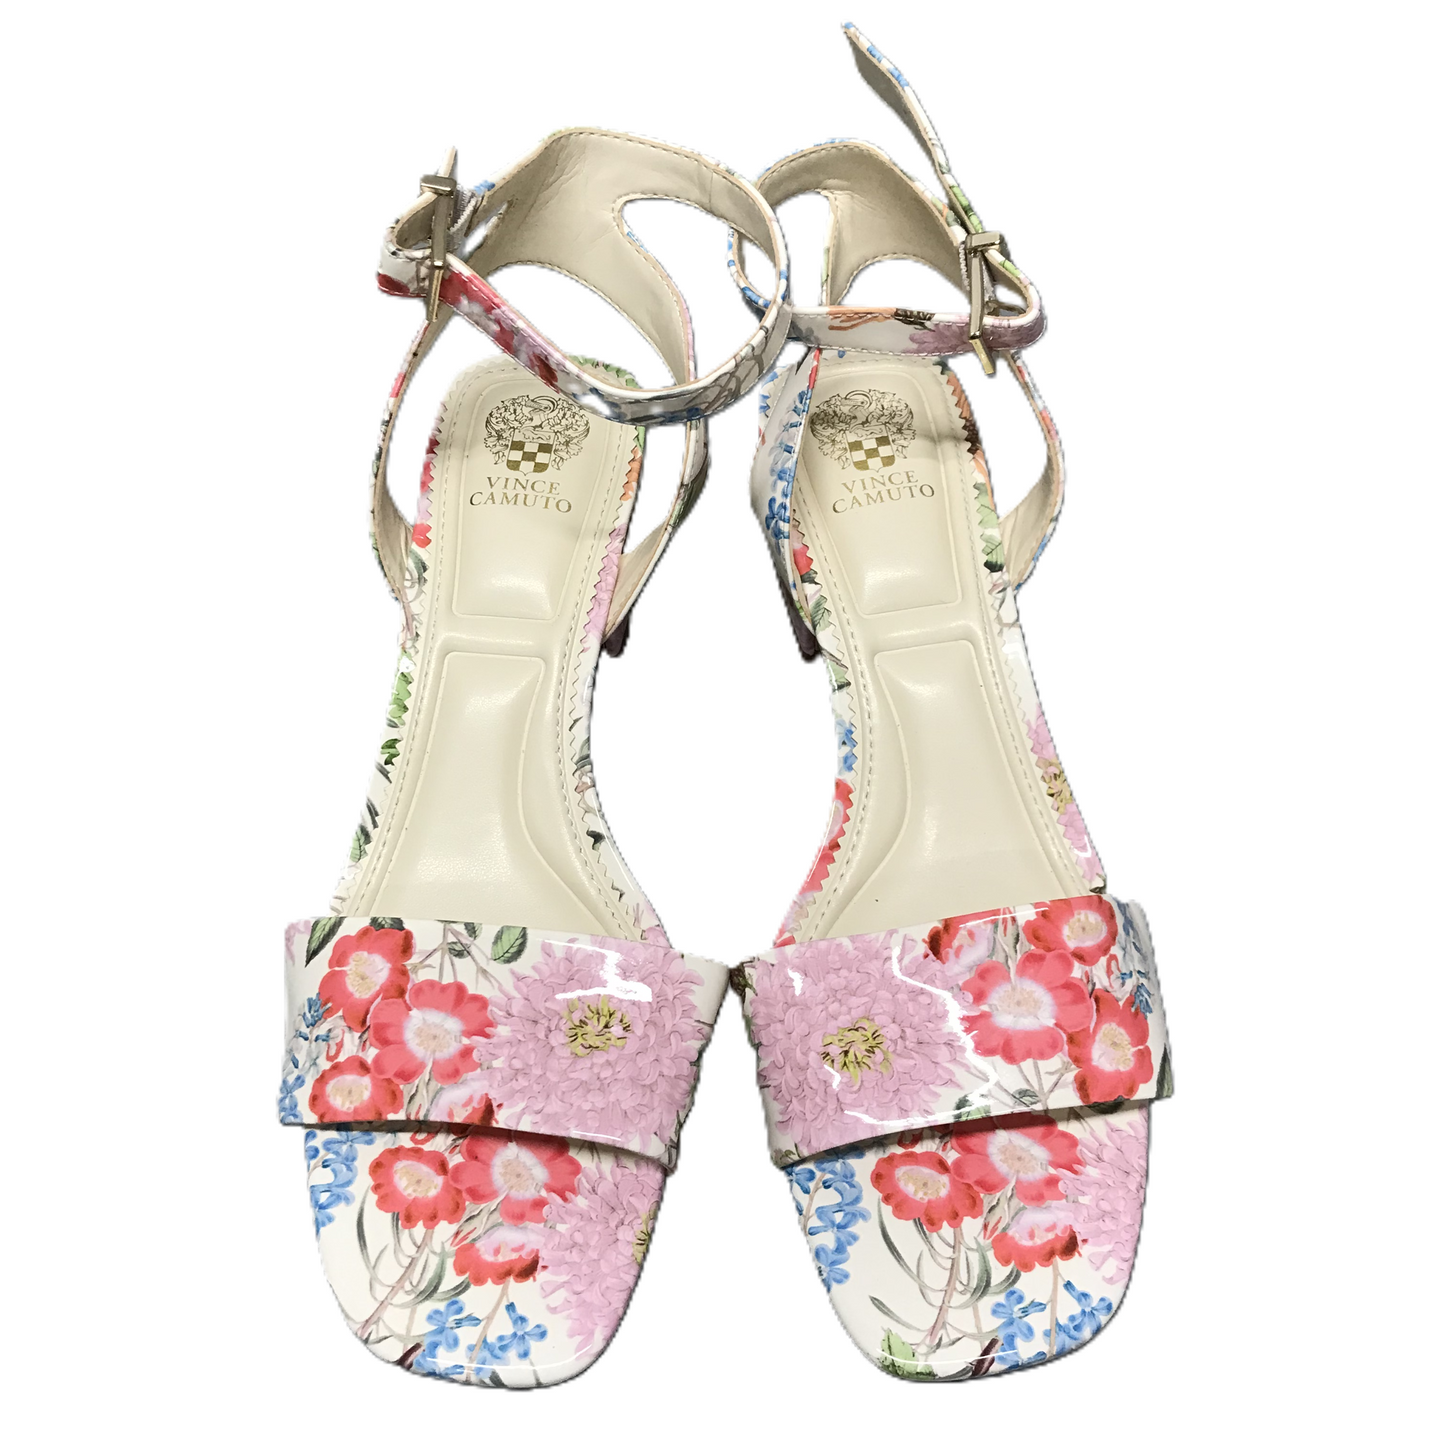 Floral Print Shoes Heels Block By Vince Camuto, Size: 8.5